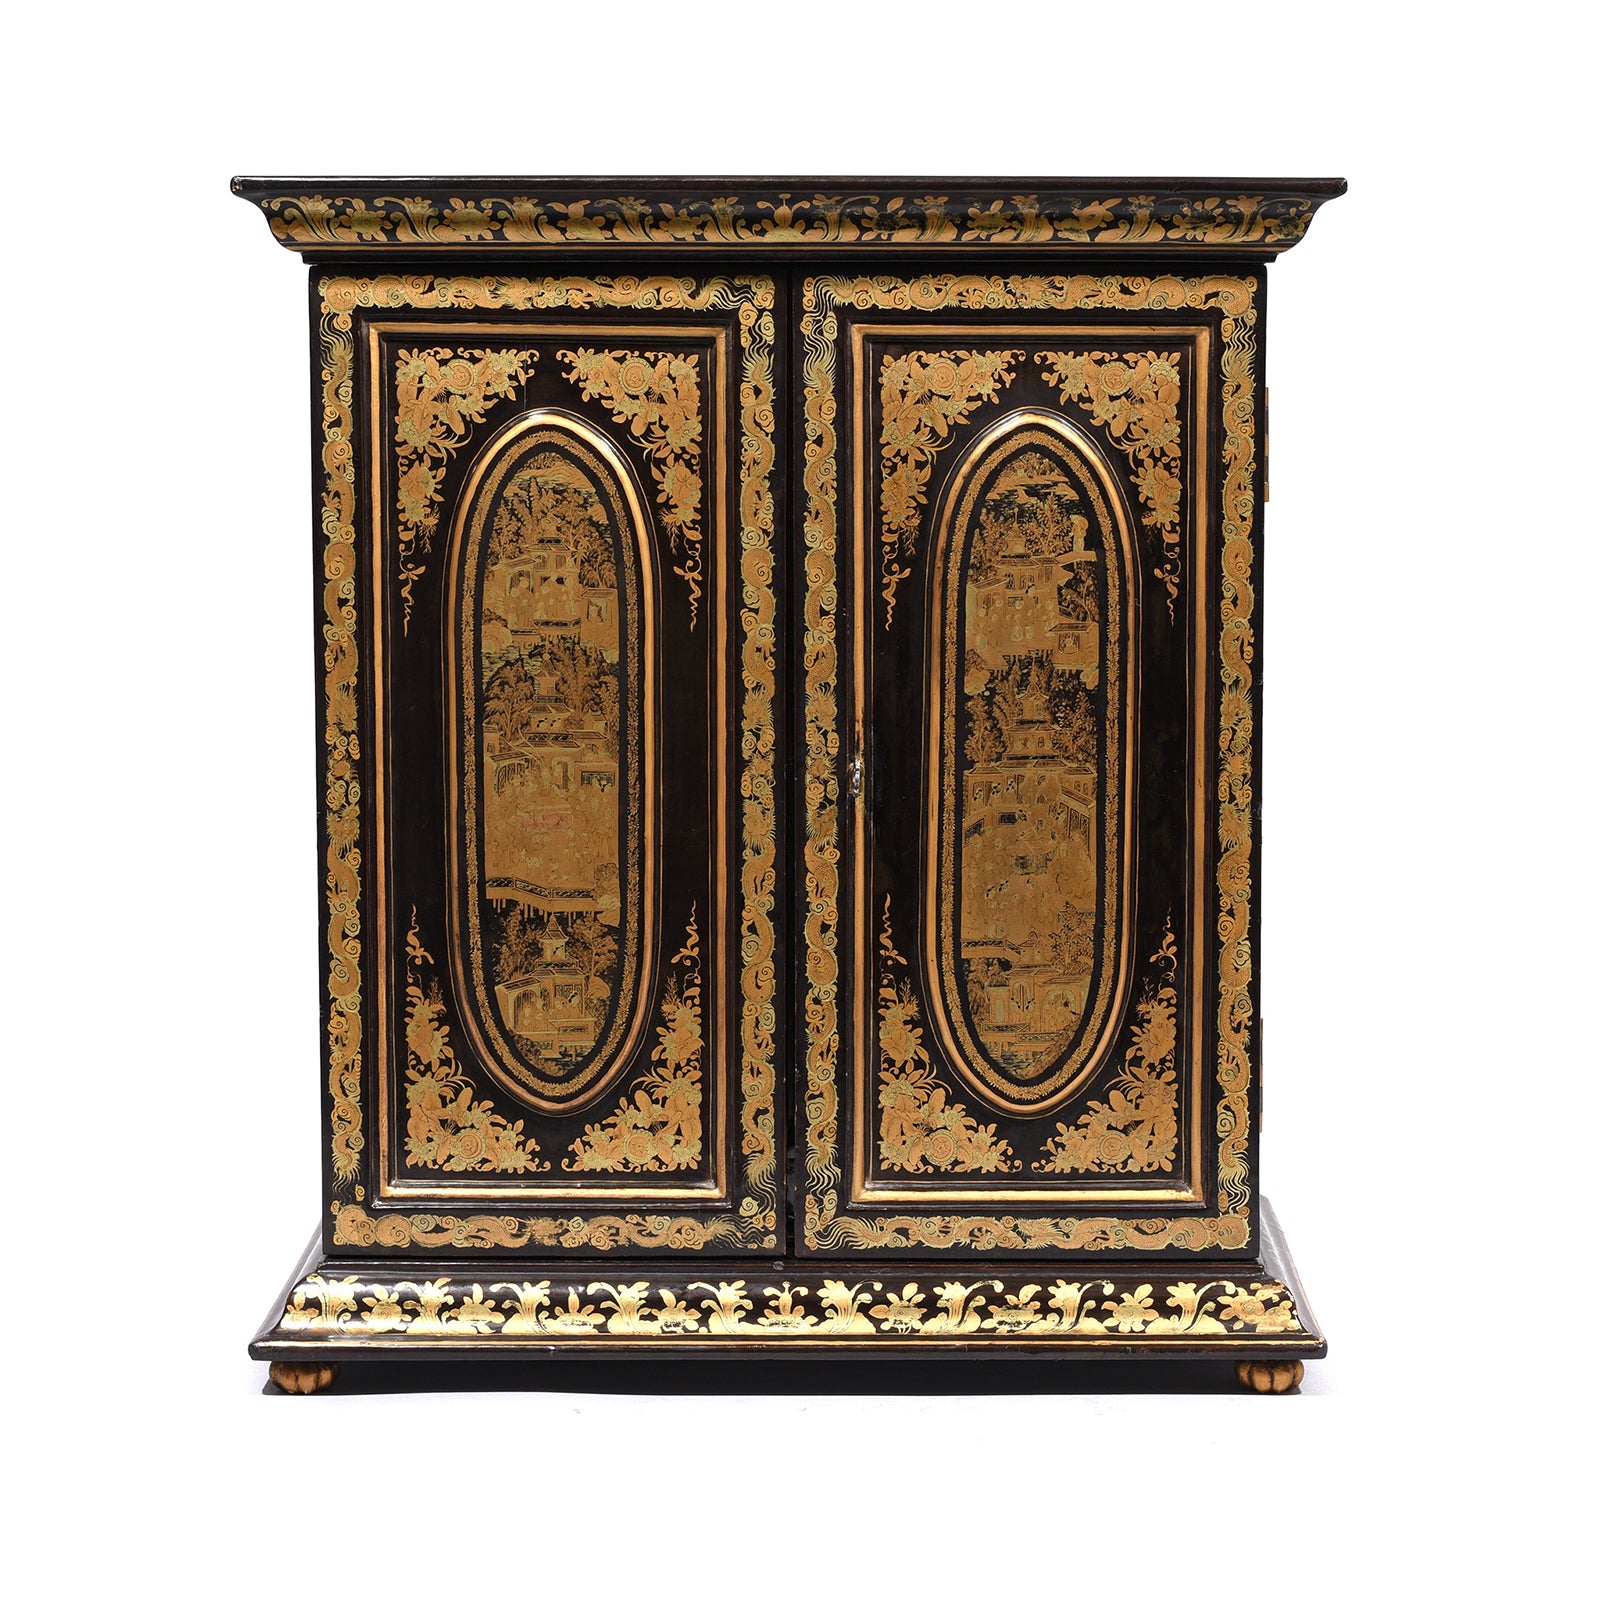 Gilt Black Lacquer Chinese Export Jewellery Cabinet - Early 19thC | Indigo Antiques